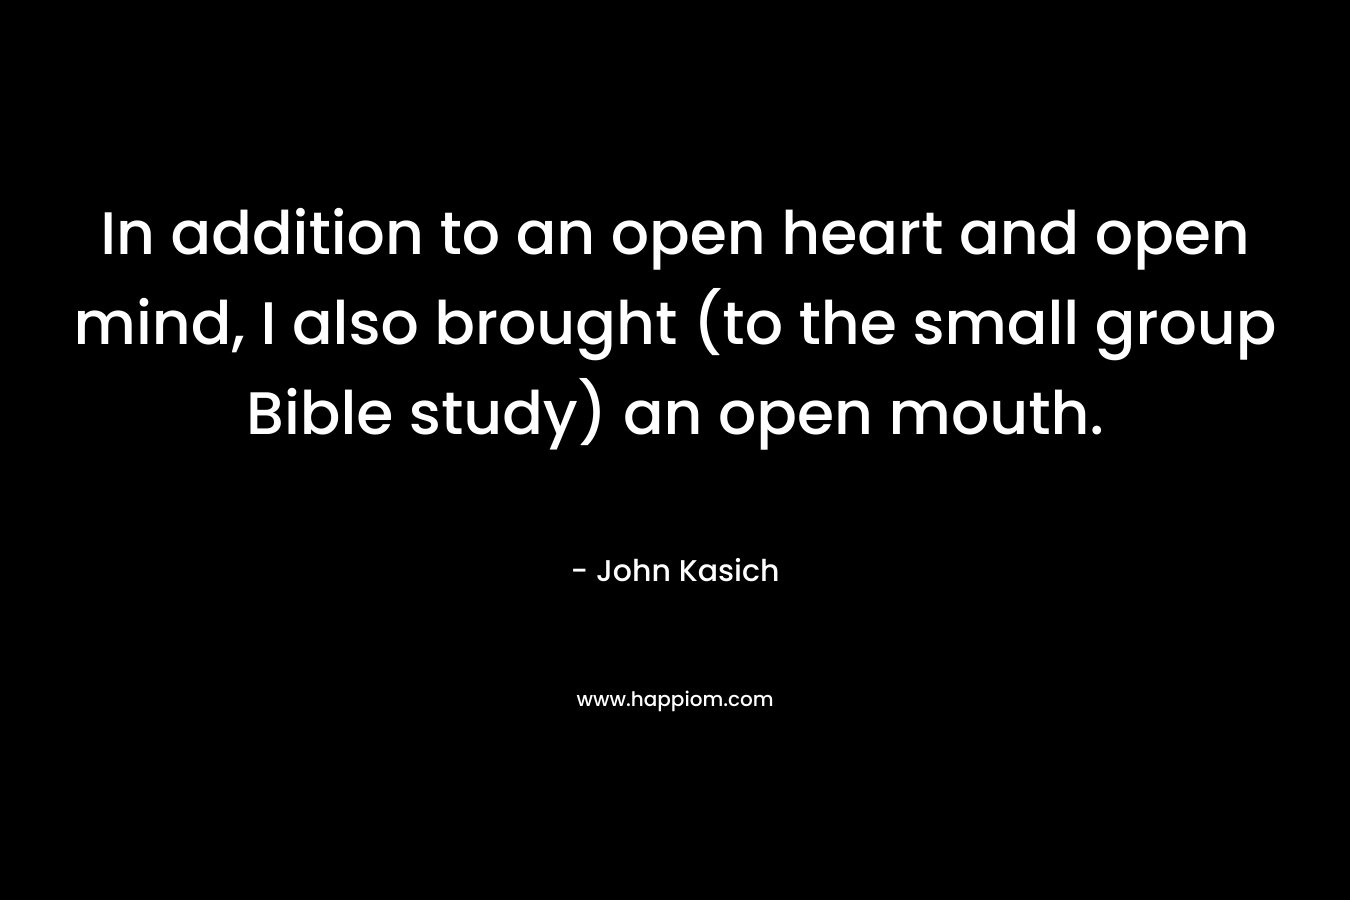 In addition to an open heart and open mind, I also brought (to the small group Bible study) an open mouth. – John Kasich